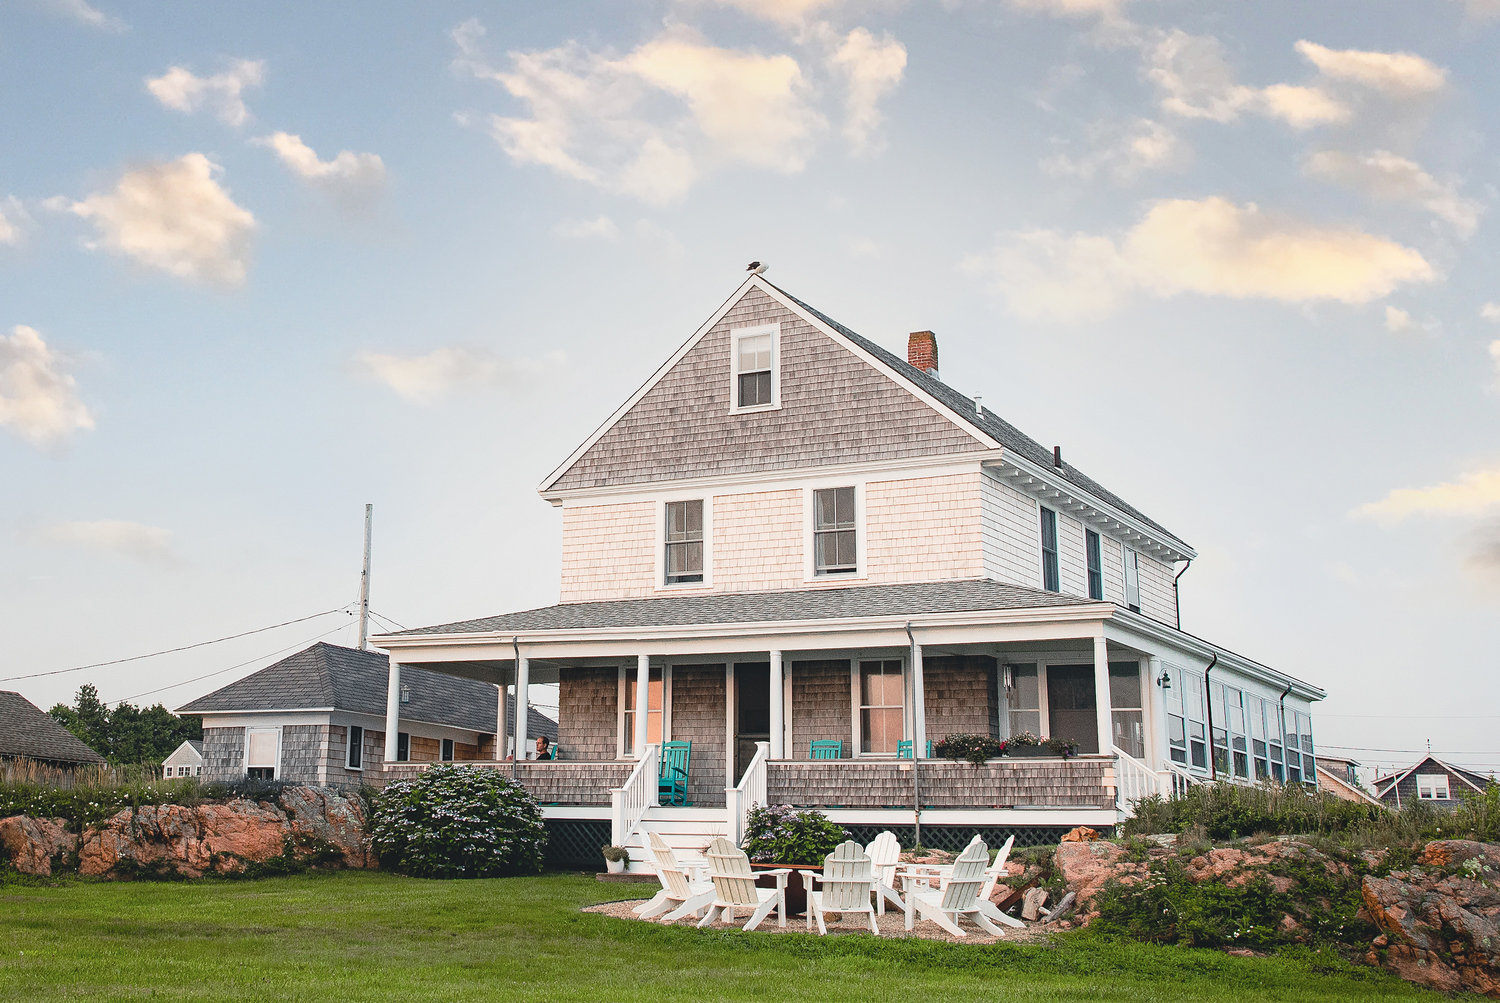 The renovated “Big House” sits on scenic Sakonnet Harbor and is outfitted for gatherings